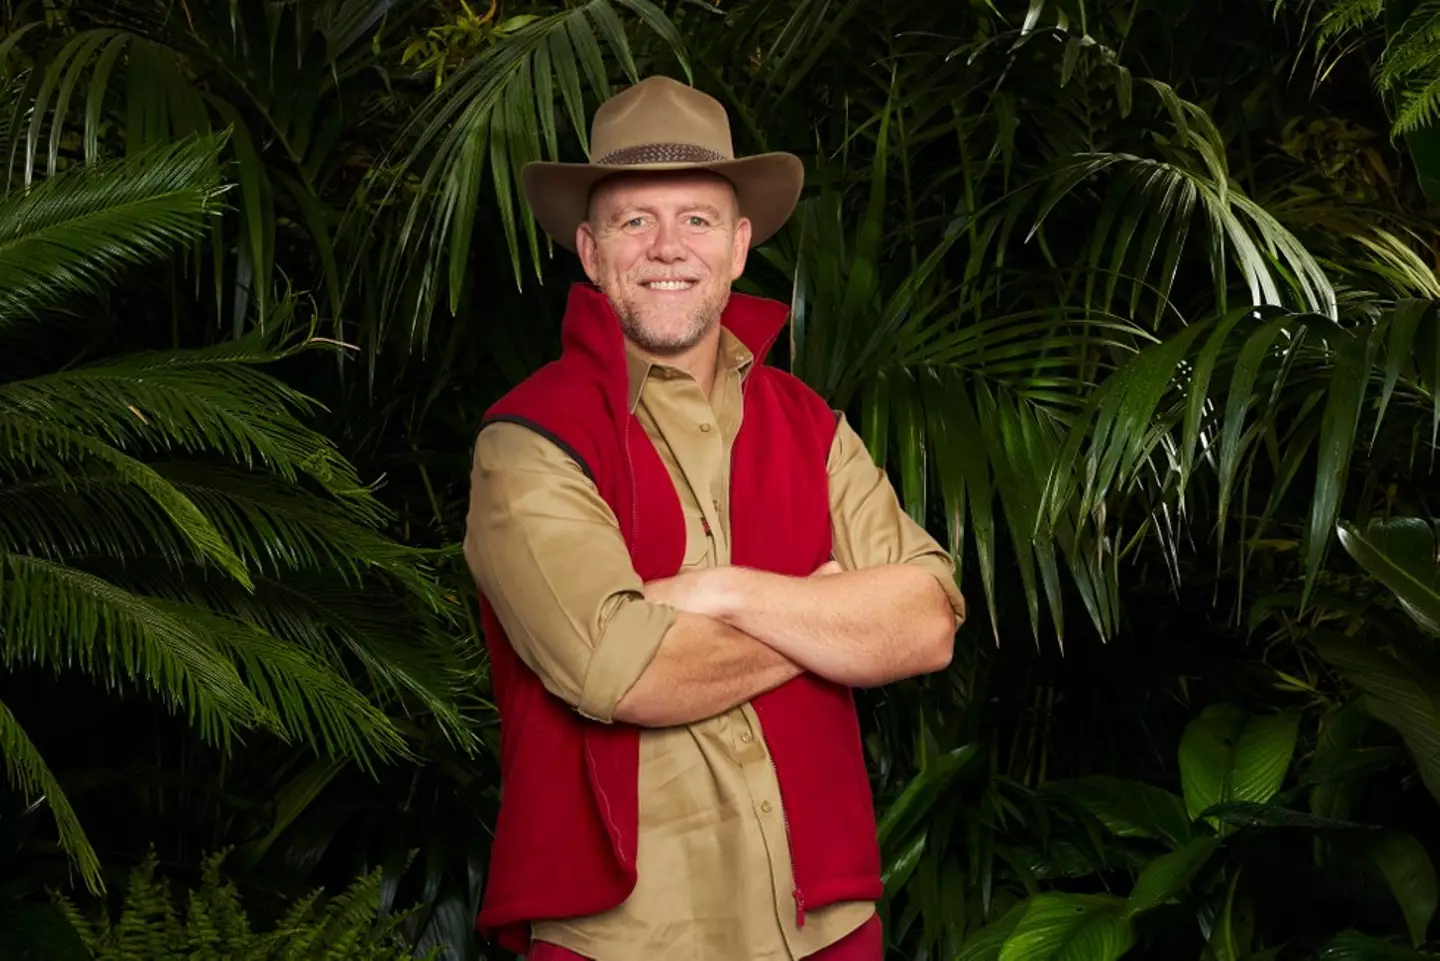 Tindall is now in the jungle.